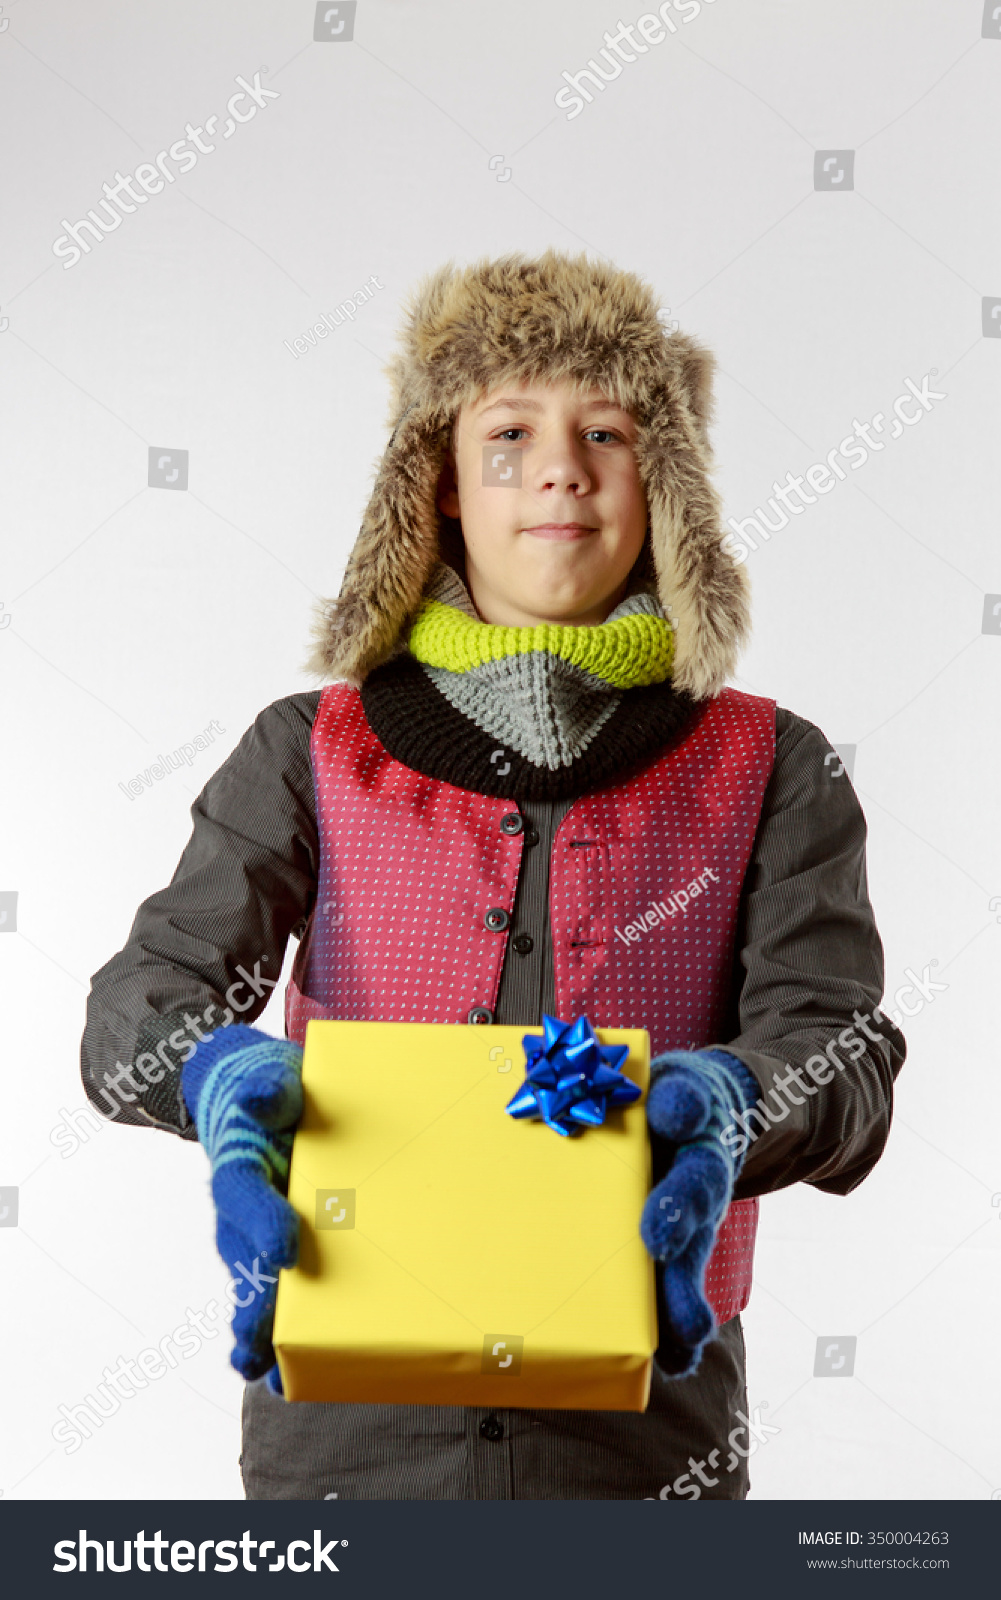 Boy presents a yellow packed present  #350004263